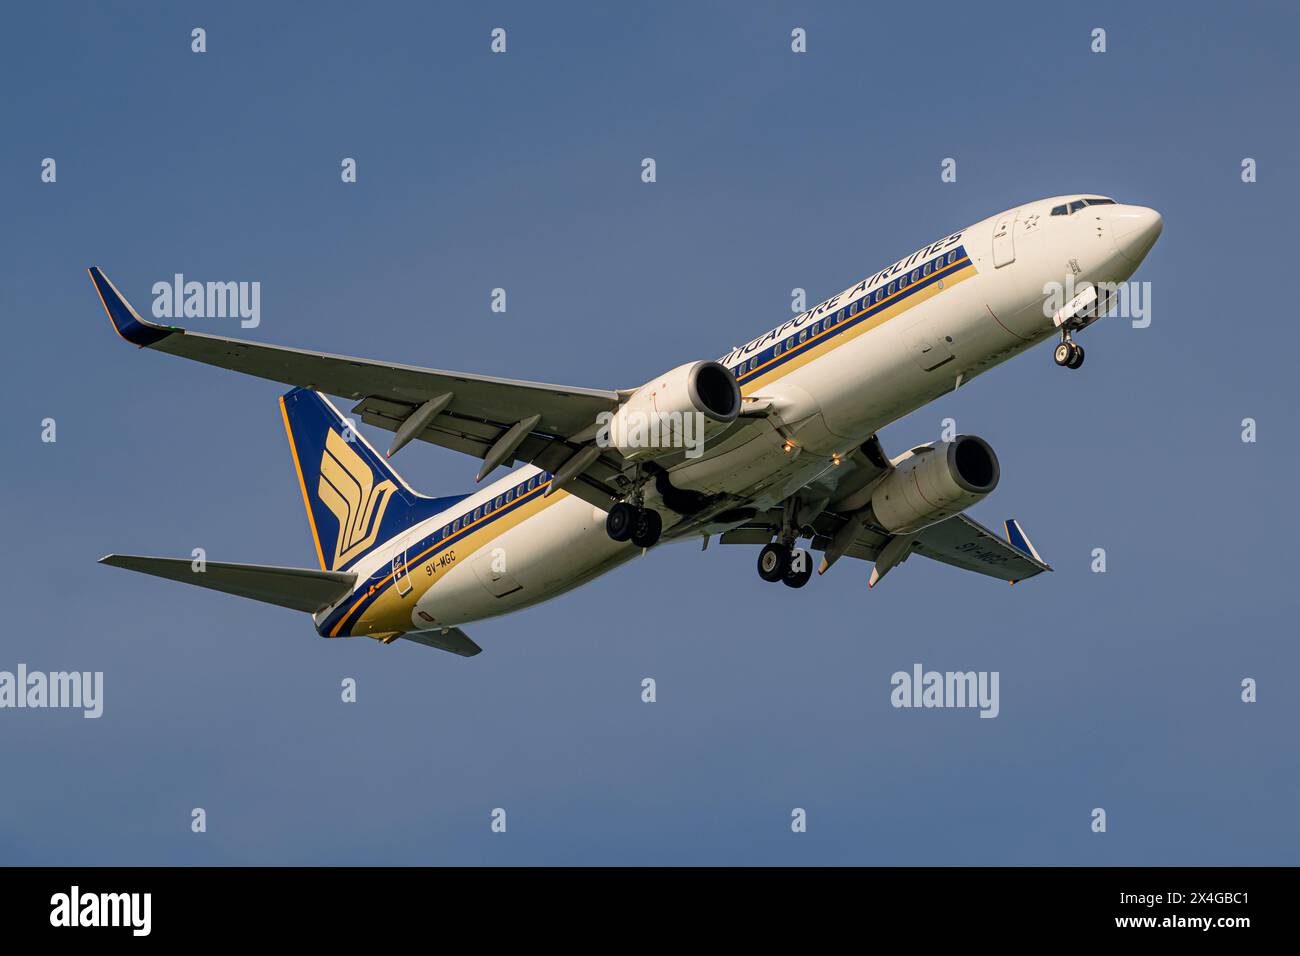 Singapore Airlines, Boeing 737-800, 9V-MGC, on final approach to Singapore Changi airport Stock Photo